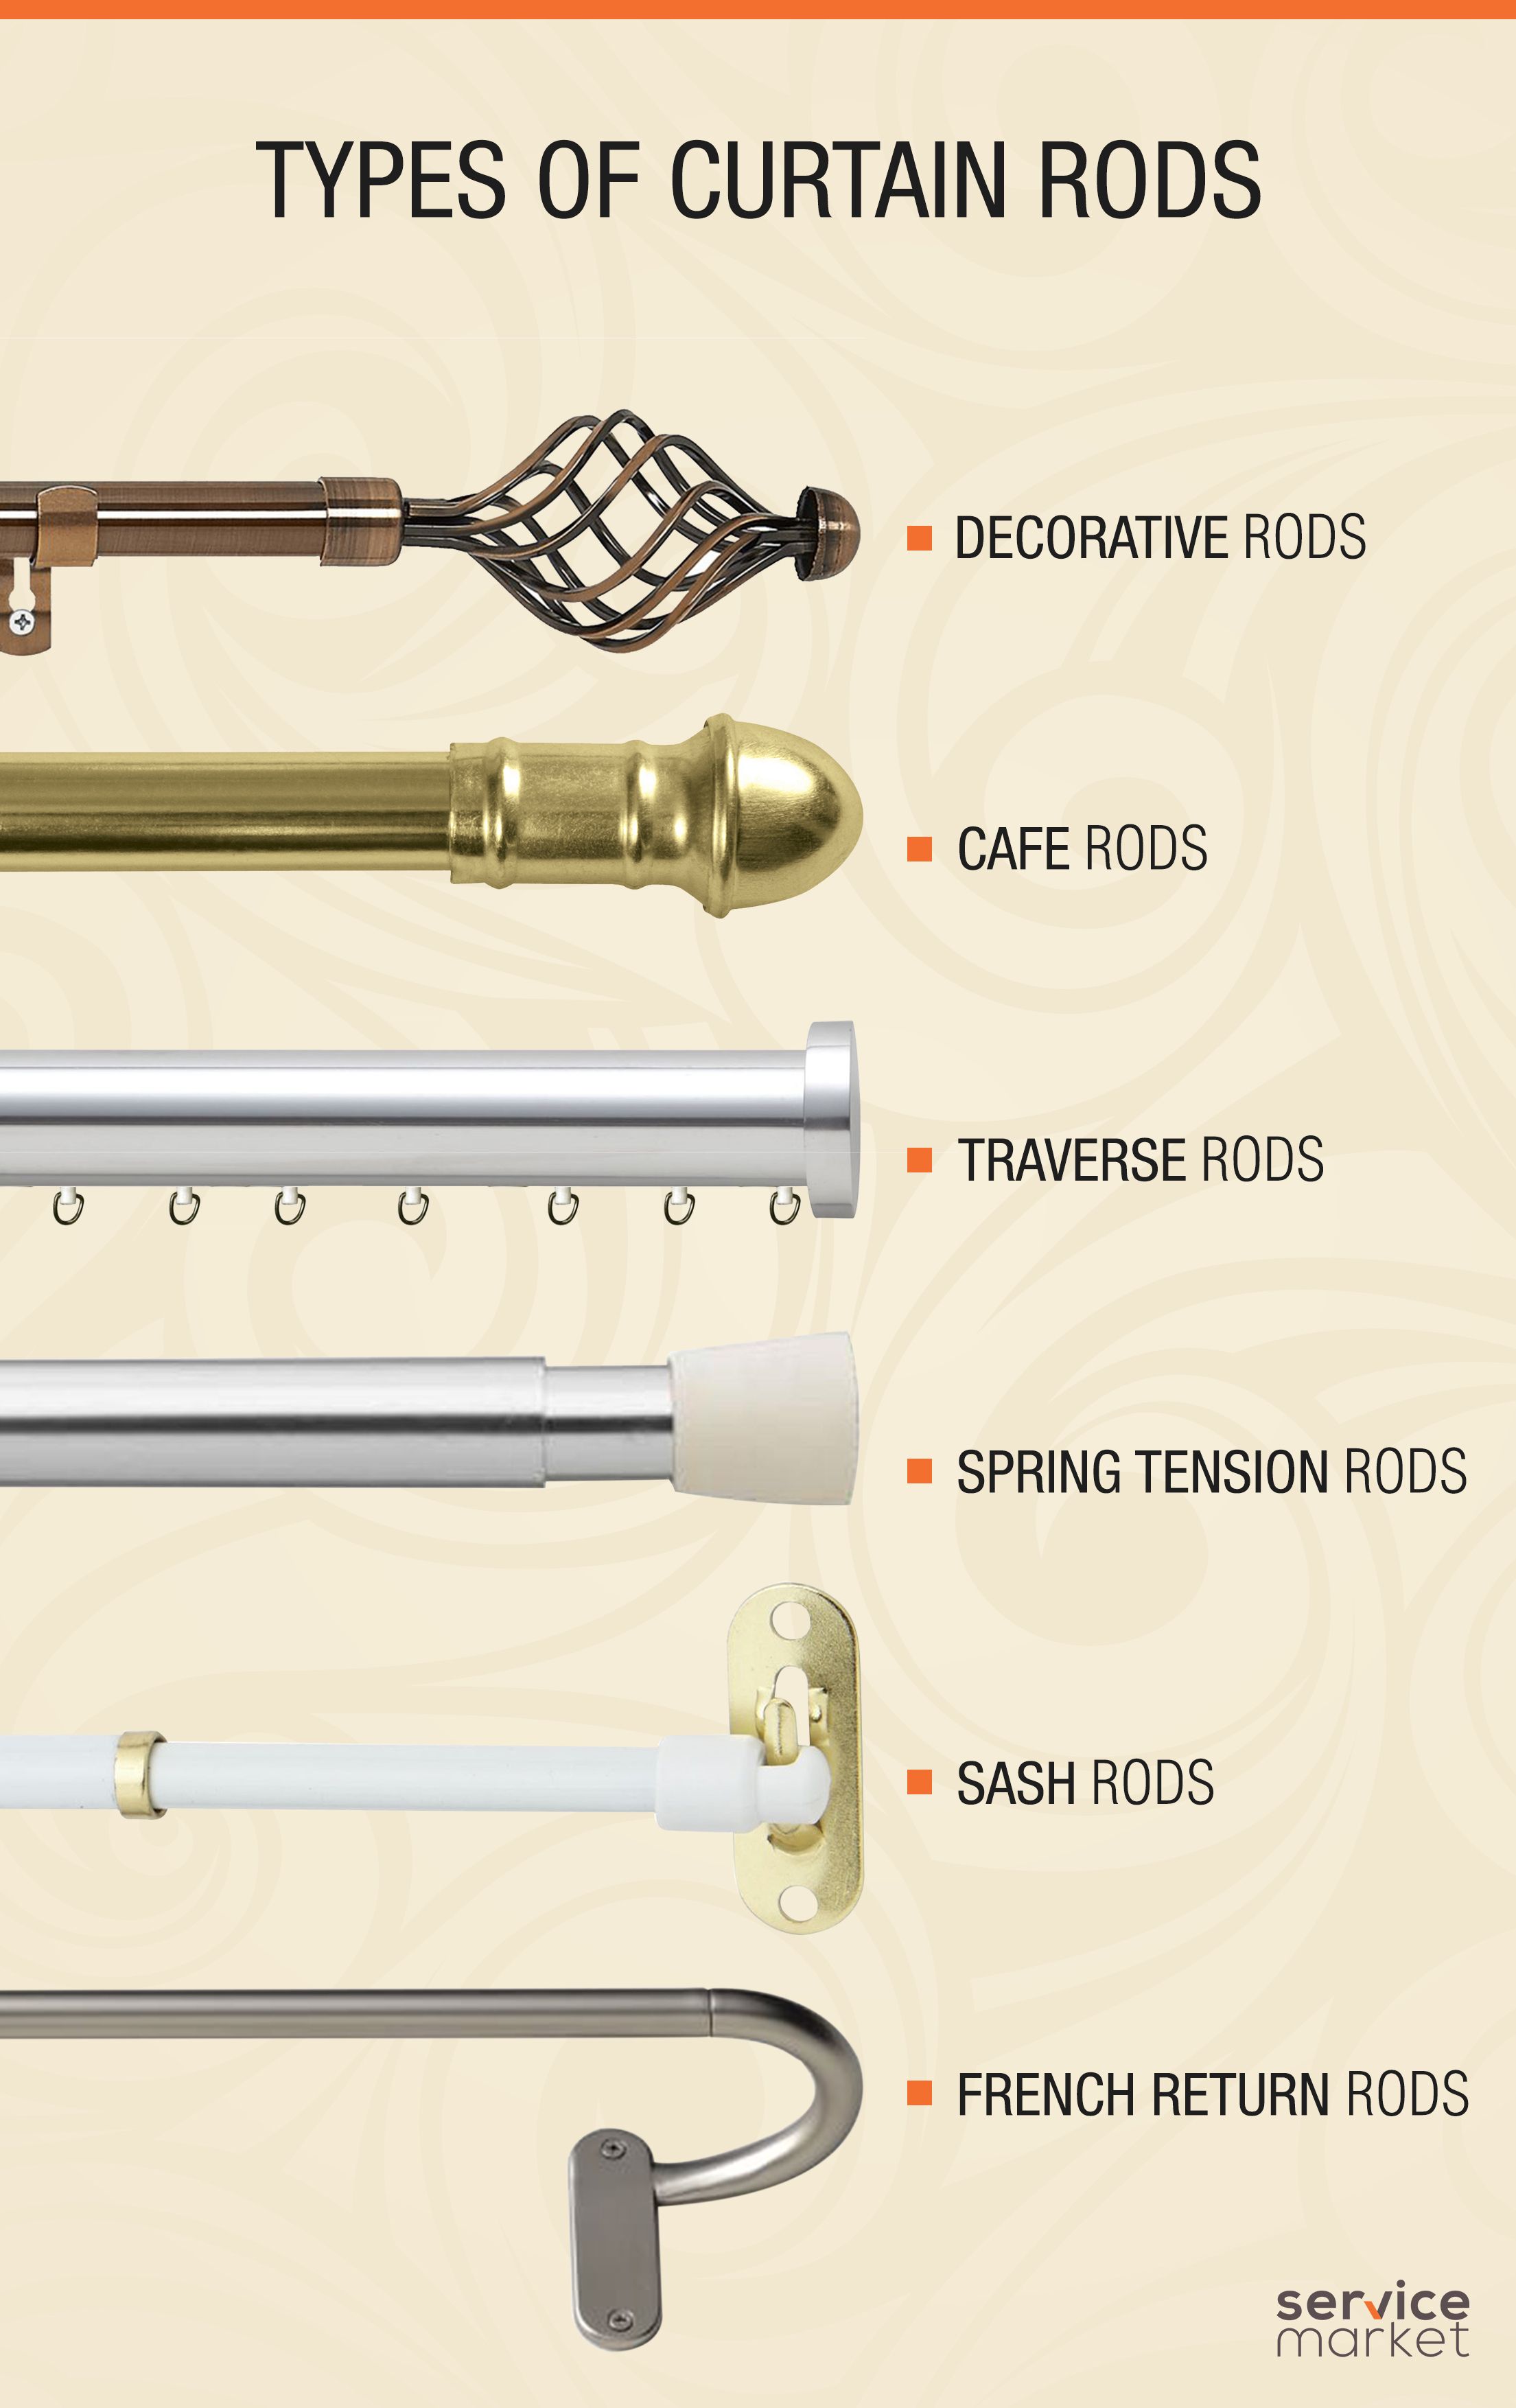 Types of Curtain Rods in Dubai - ServiceMarket Blog